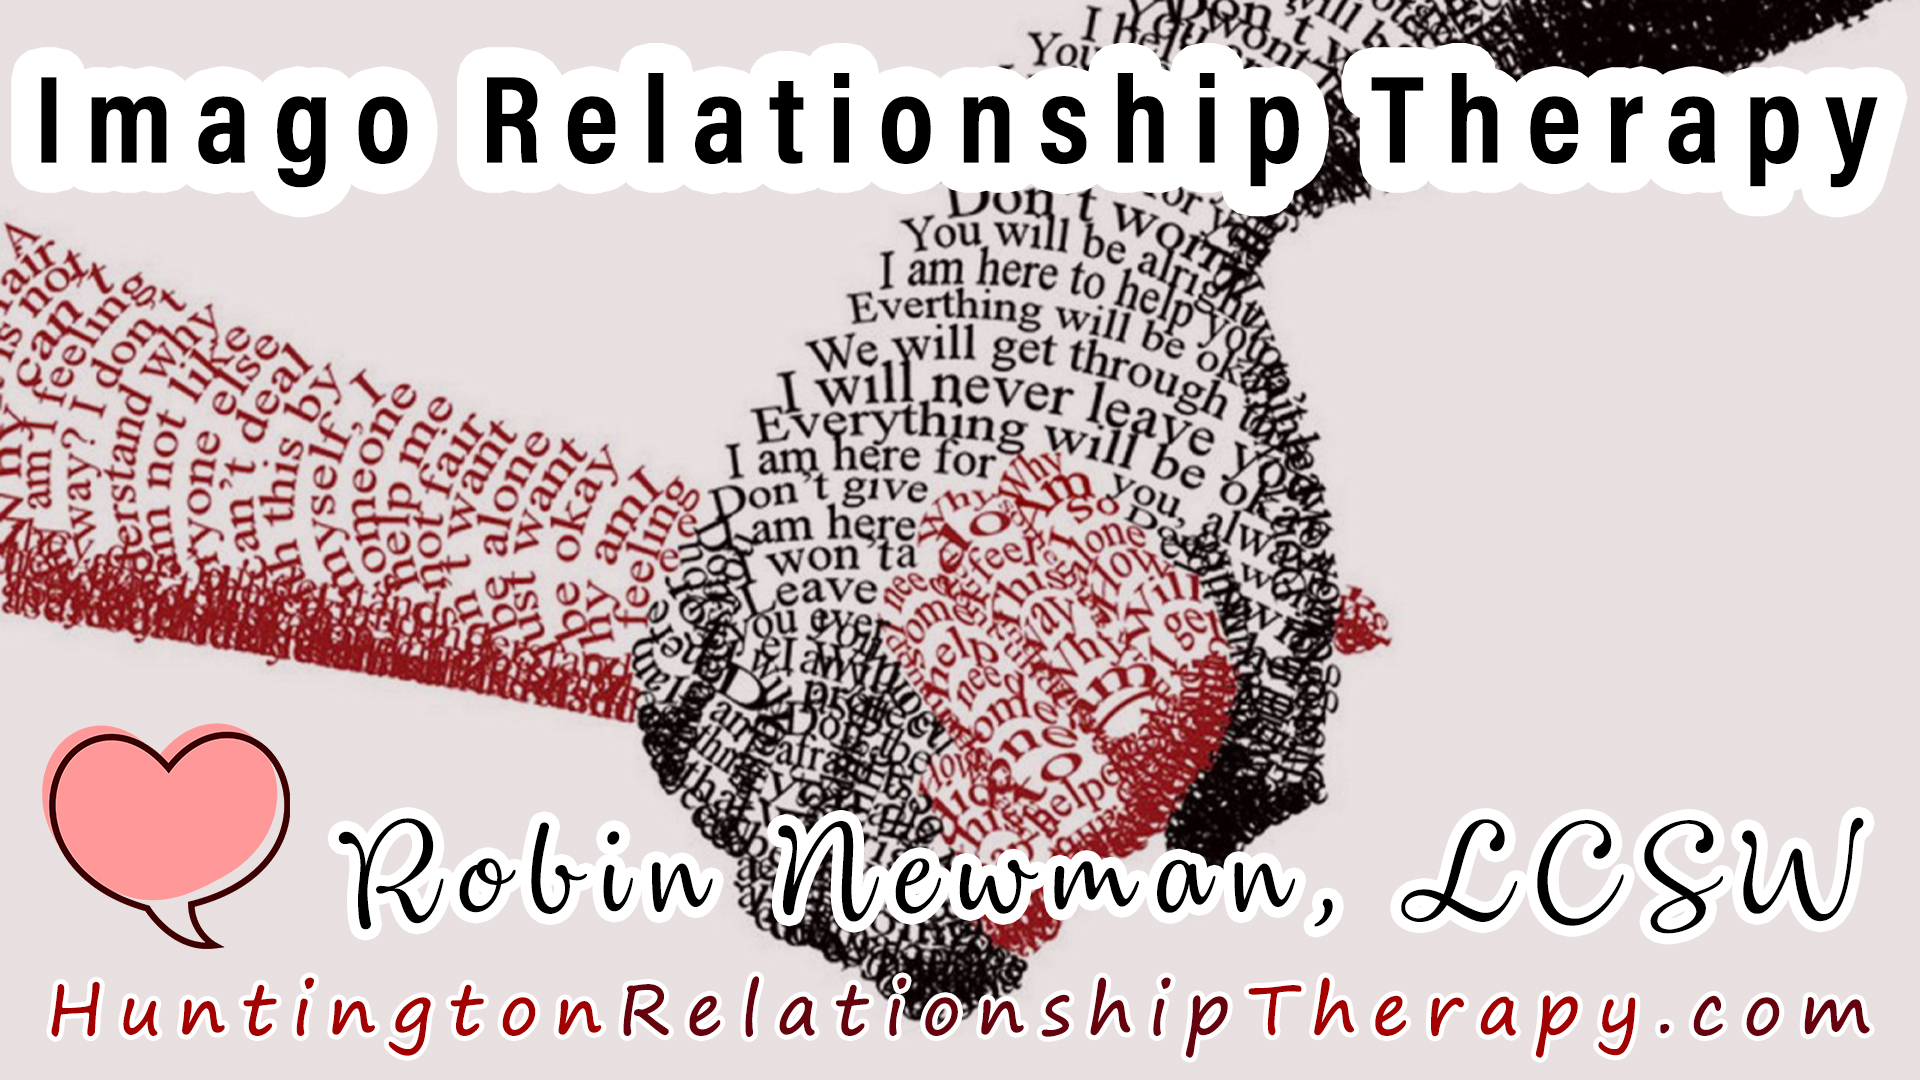 Robin Newman, Imago Relationship Therapist in Long Island